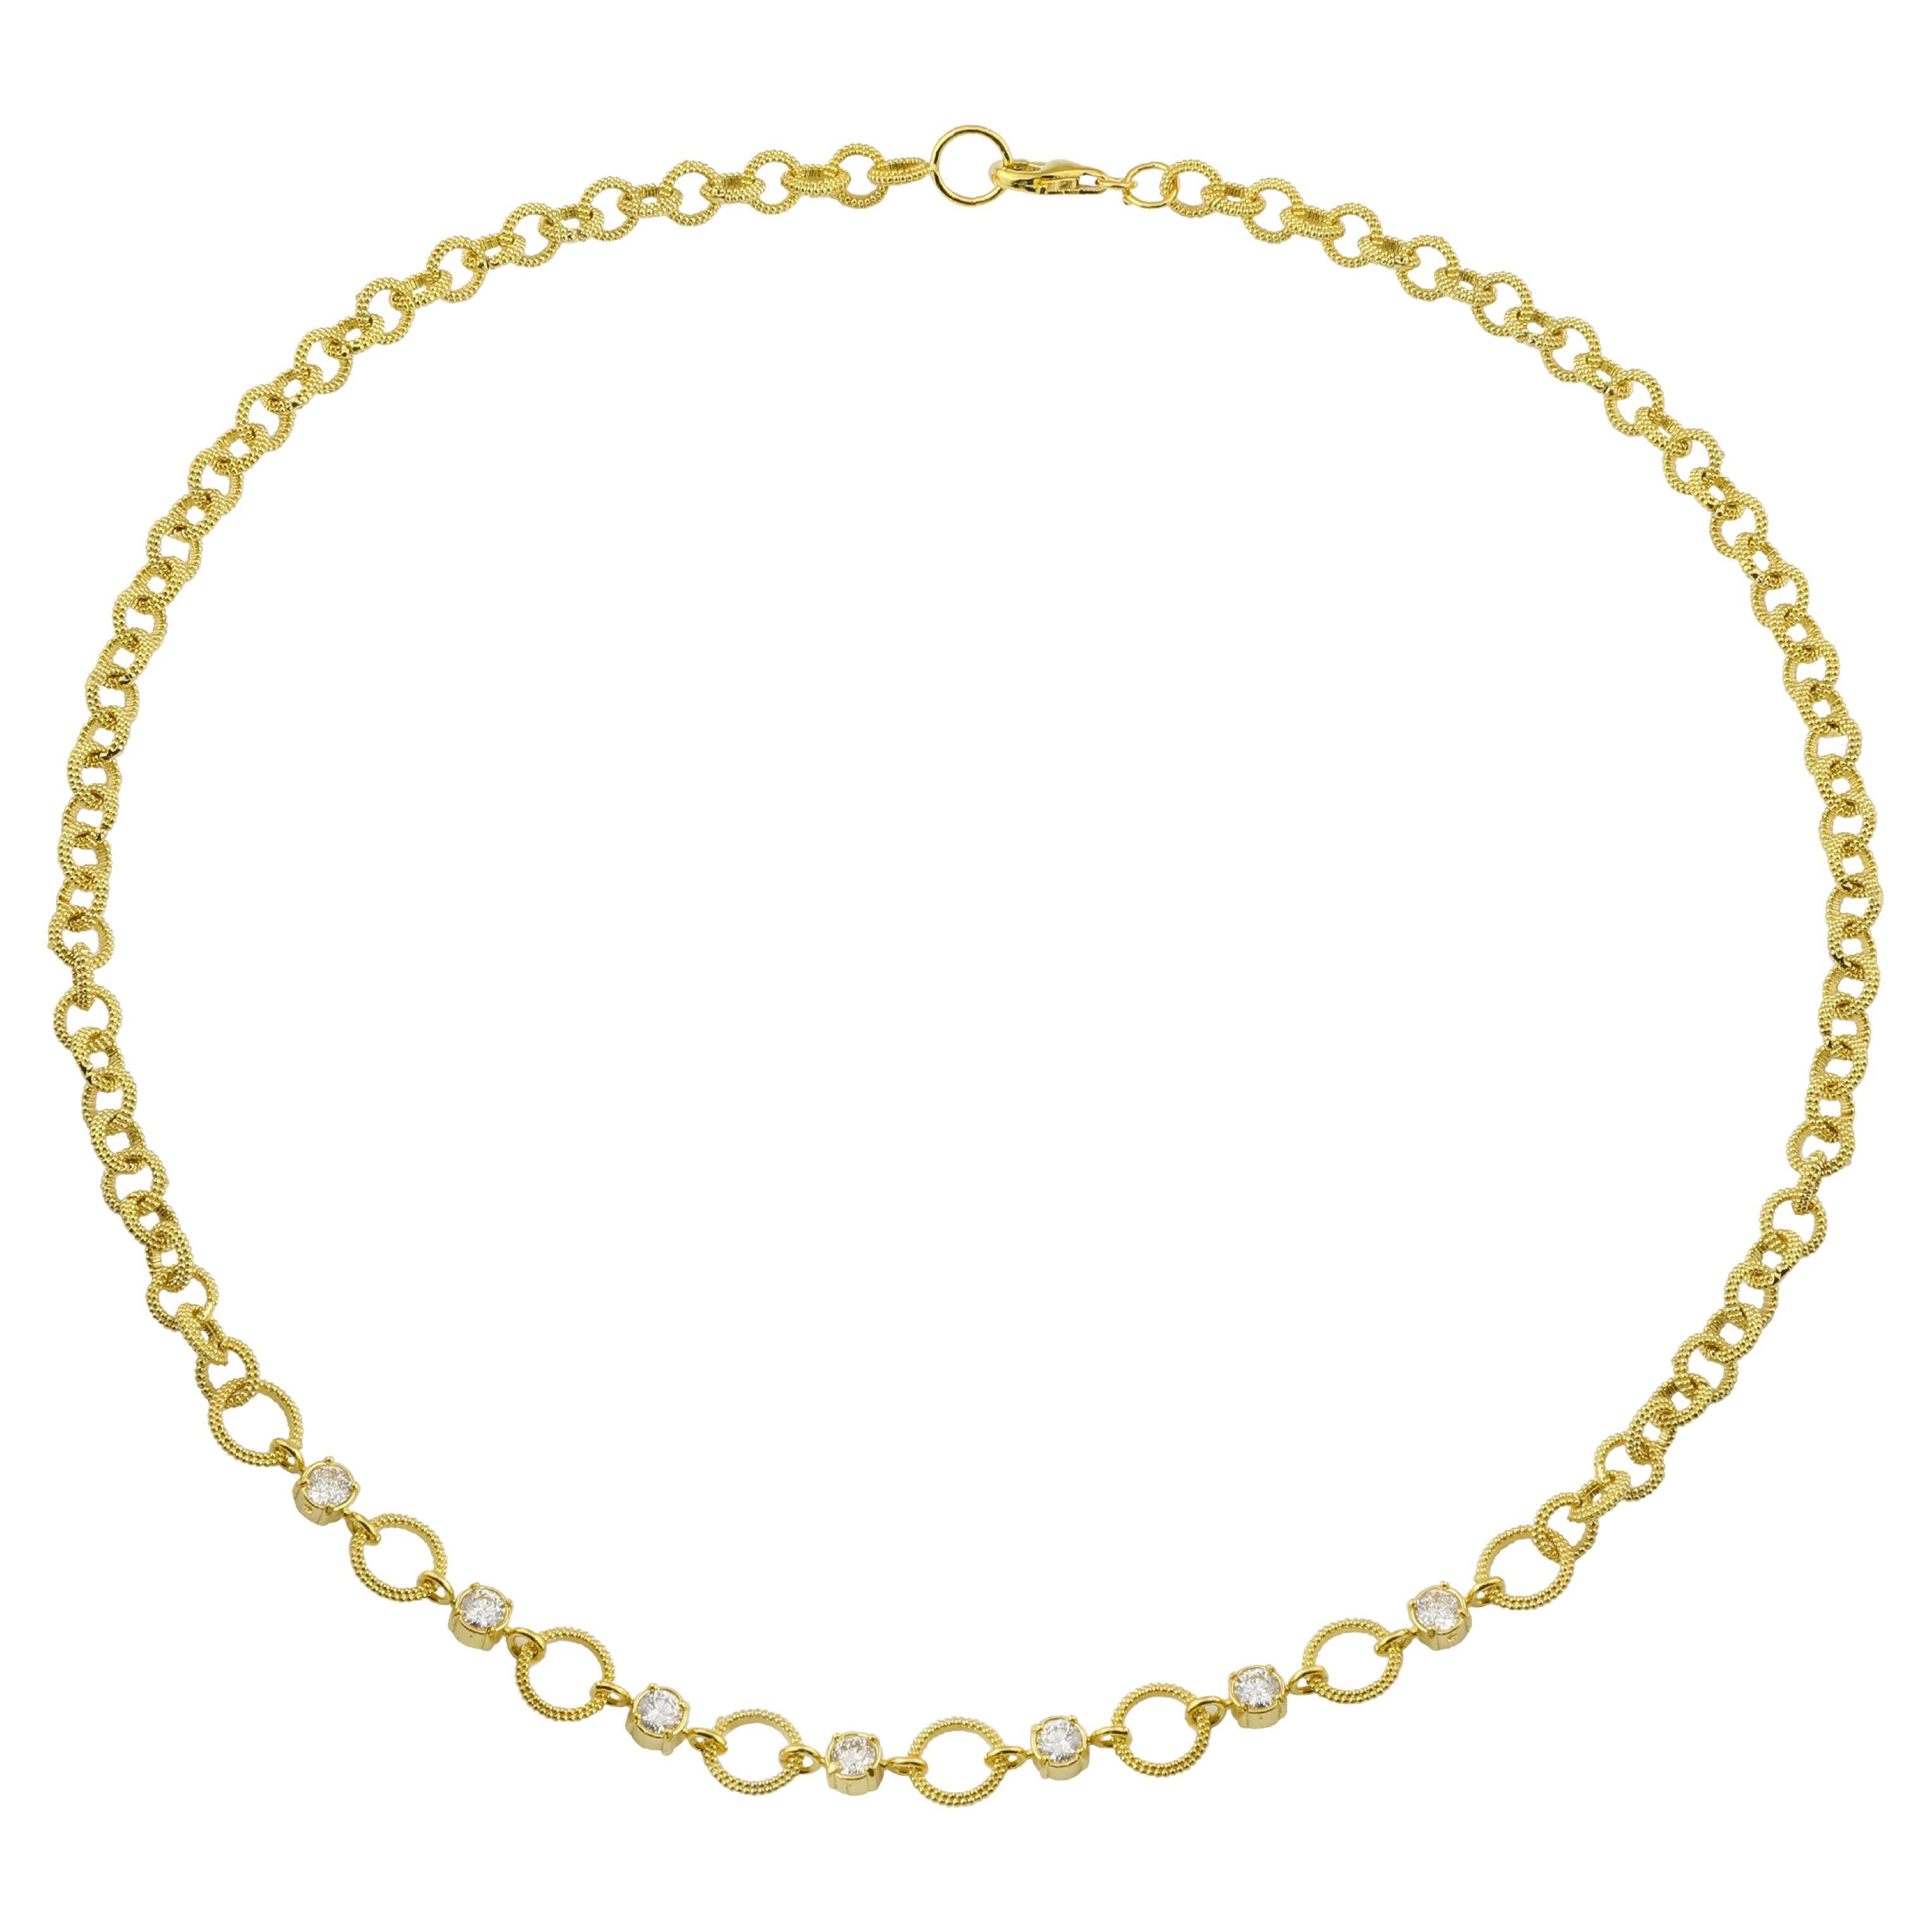 Amyn, Etruscan Round Granulated Link Necklace with Diamonds in 18k Gold